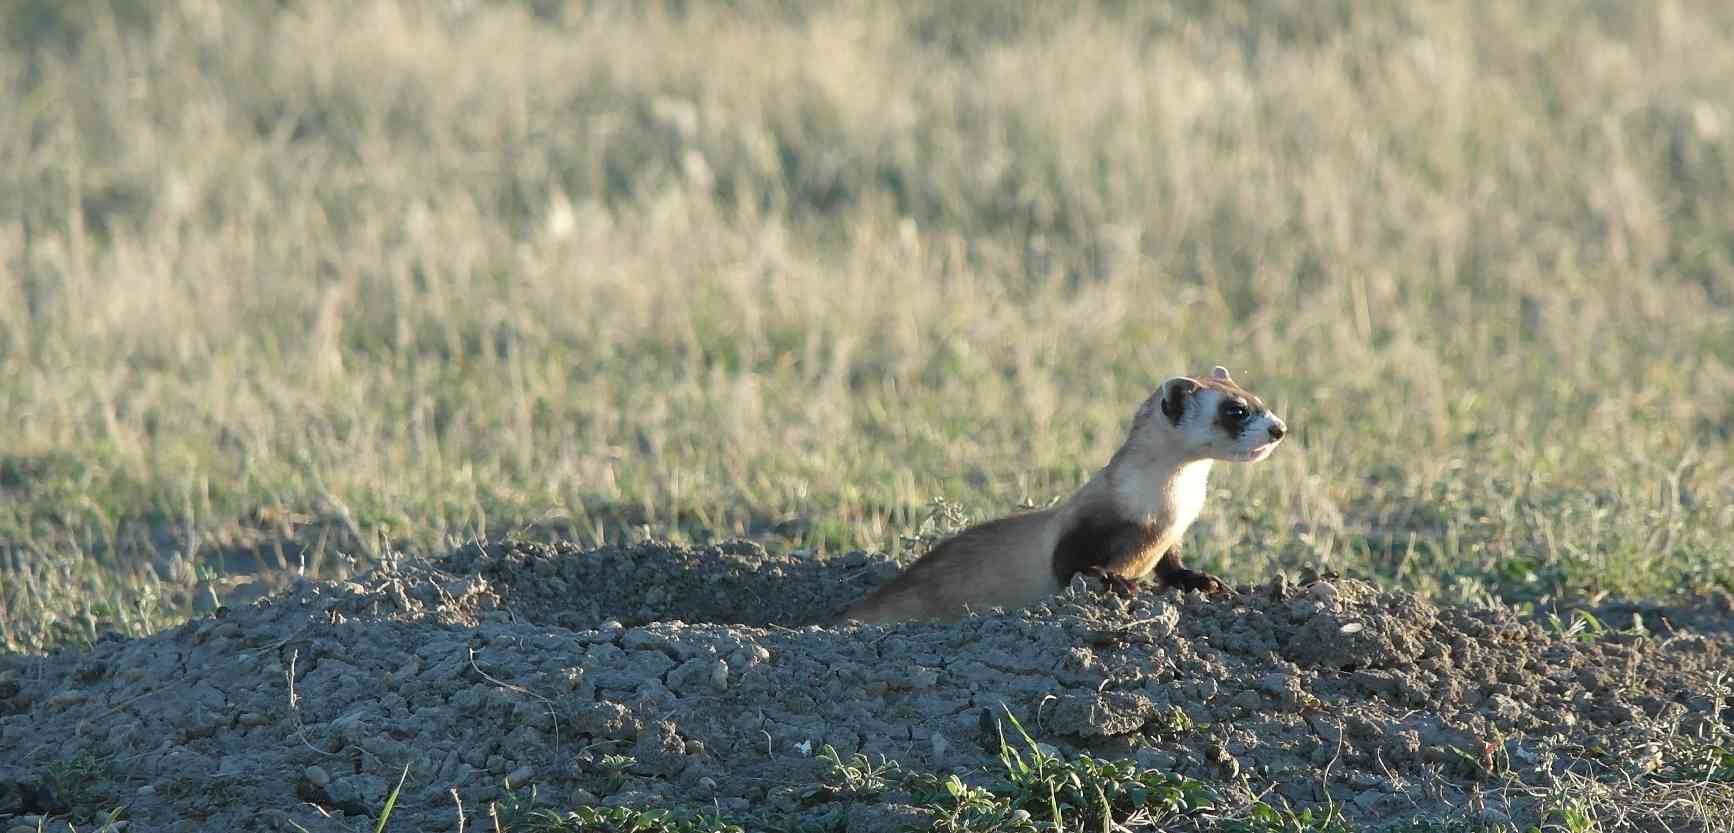 A just released black-footed ferret at Crow Nation